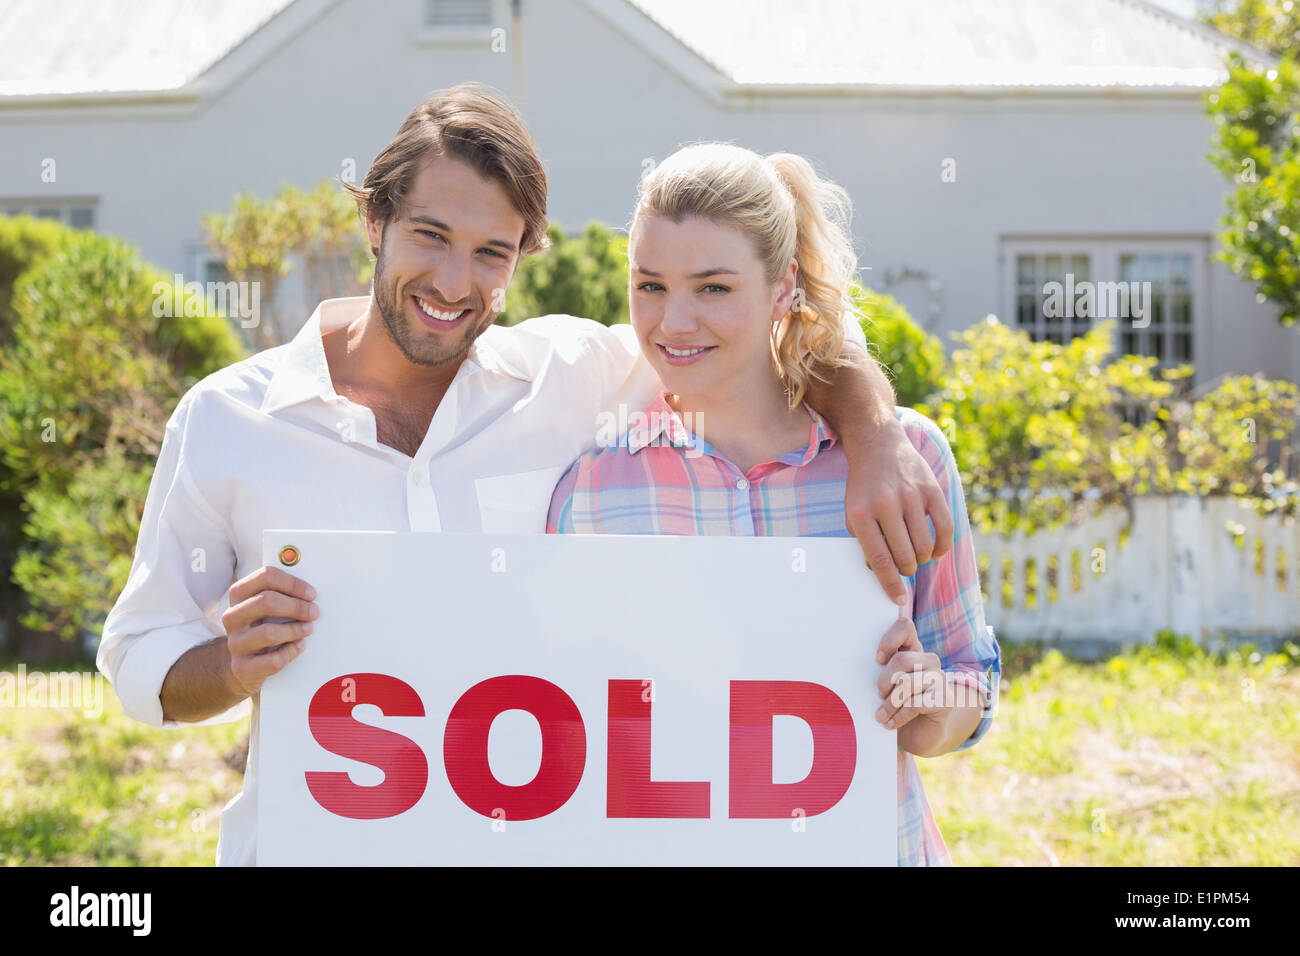 Cute couple standing together in their garden holding sold sign Stock Photo